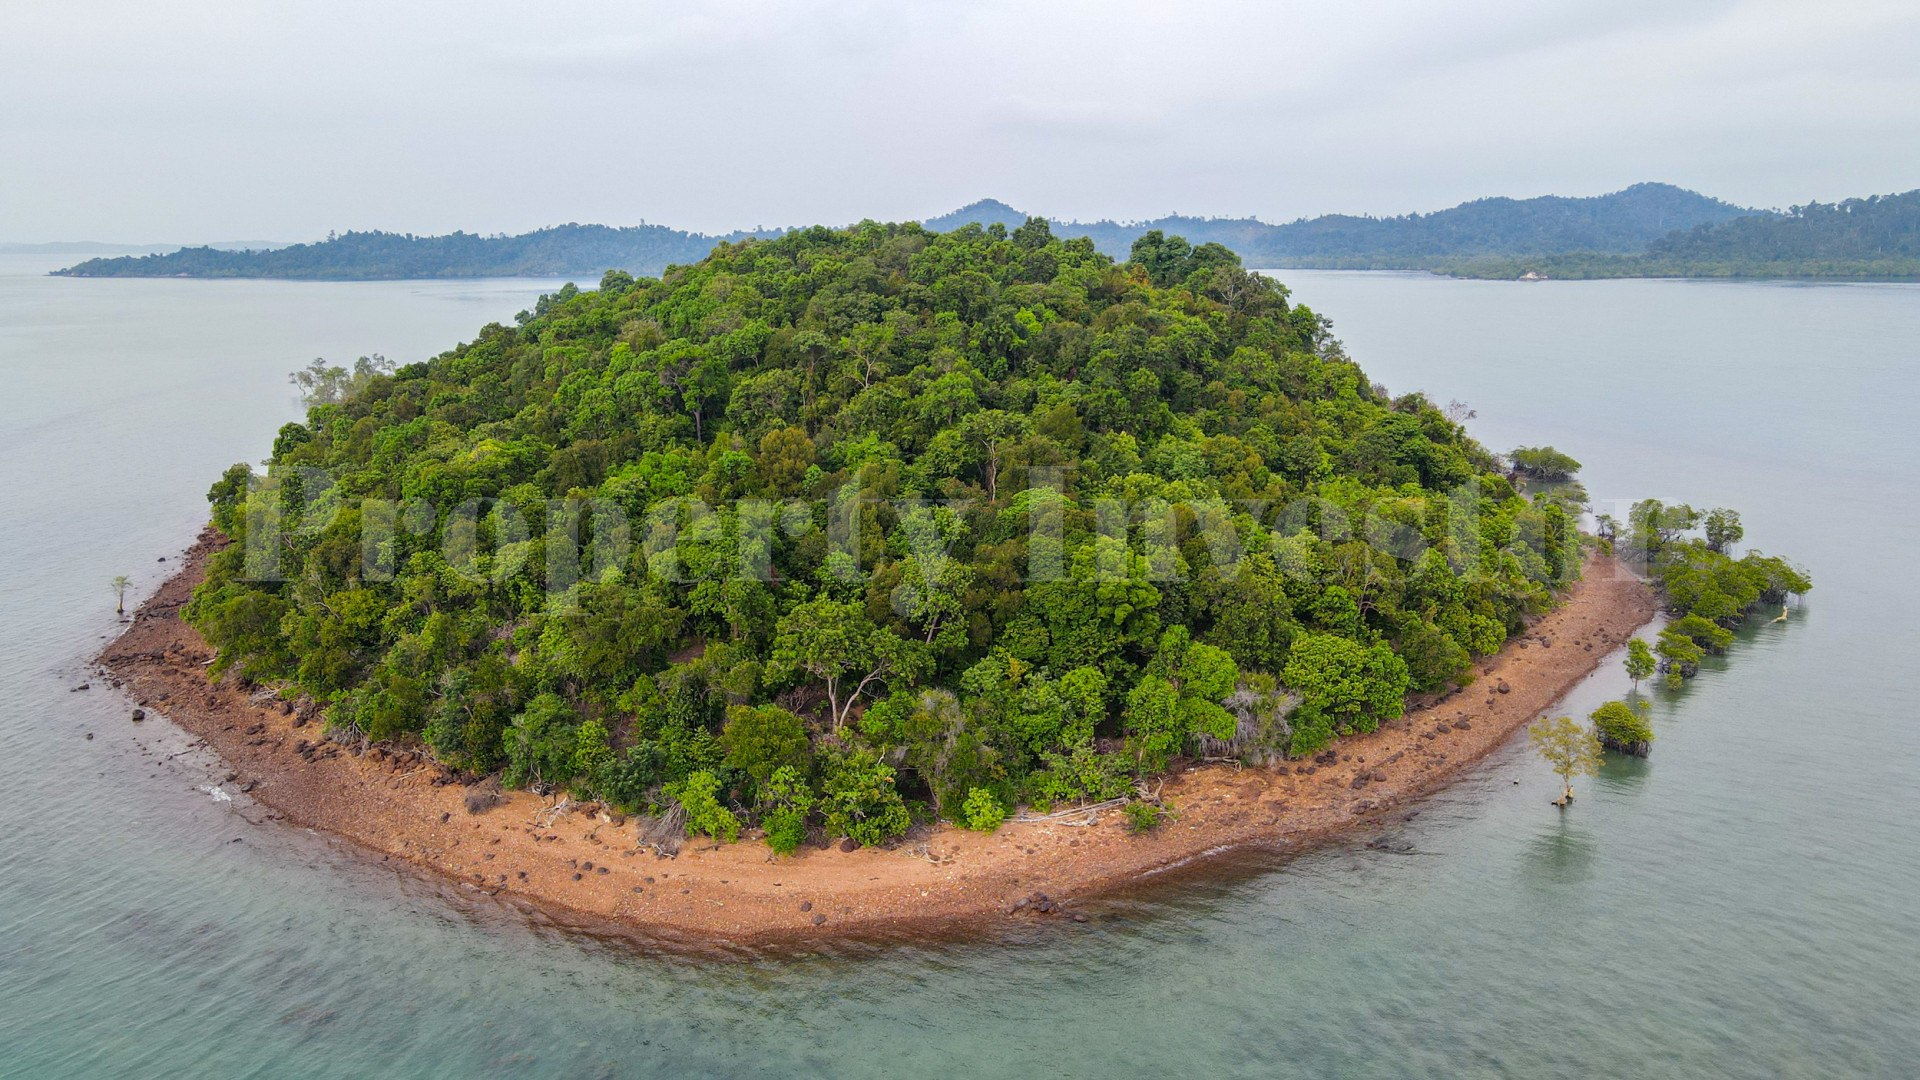 12.5 Hectare Virgin Island for Sale Near the Singapore Strait, Indonesia